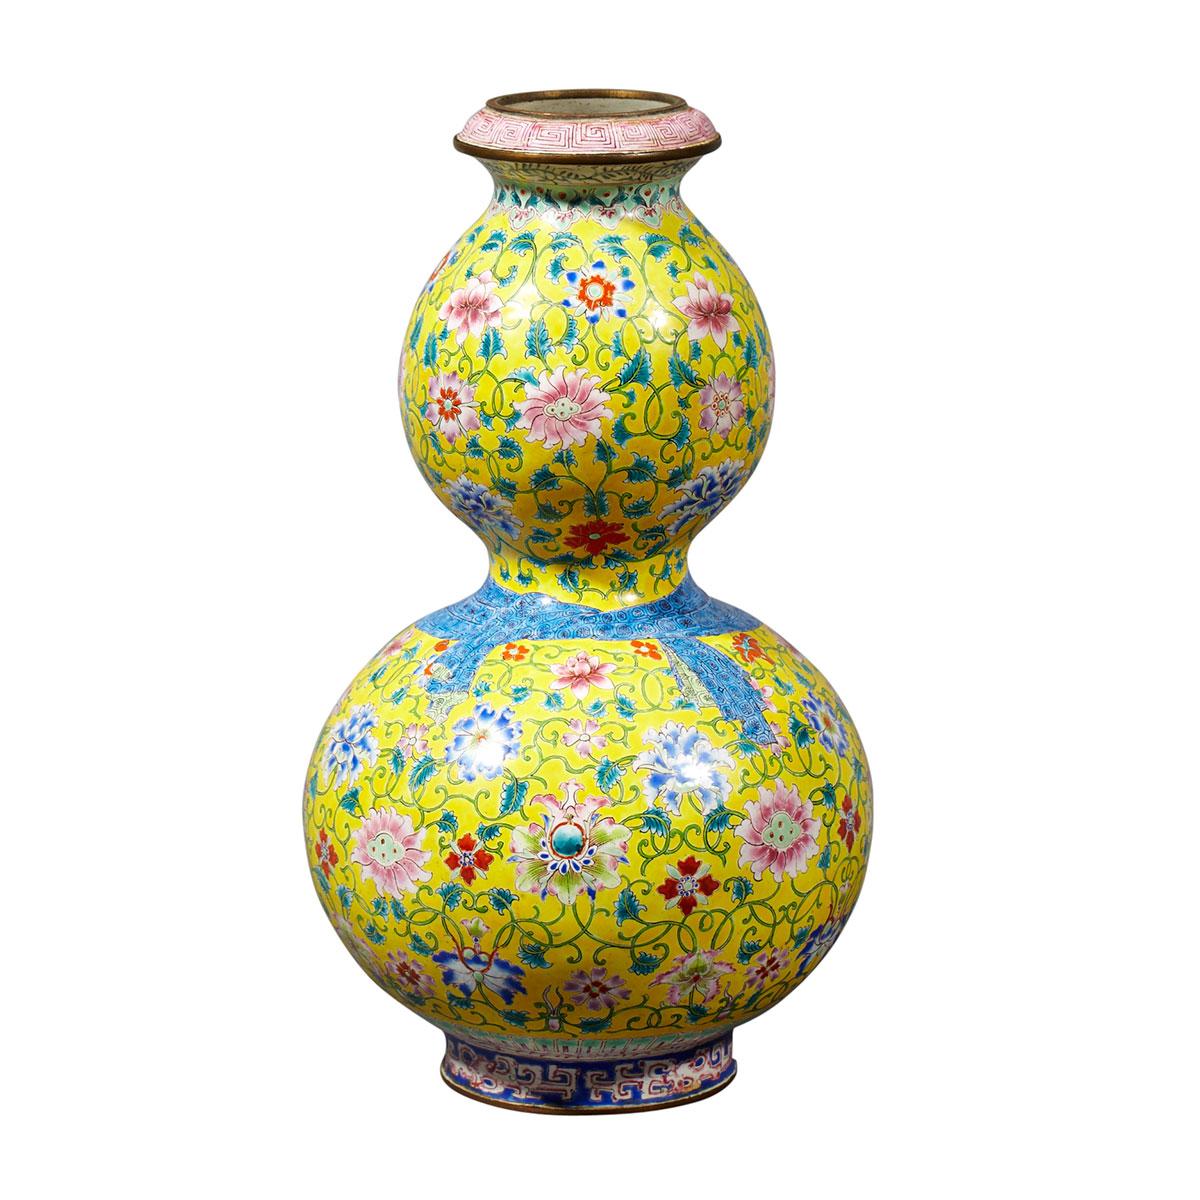 Painted-Enamel Double Gourd Vase, 18th/19th Century